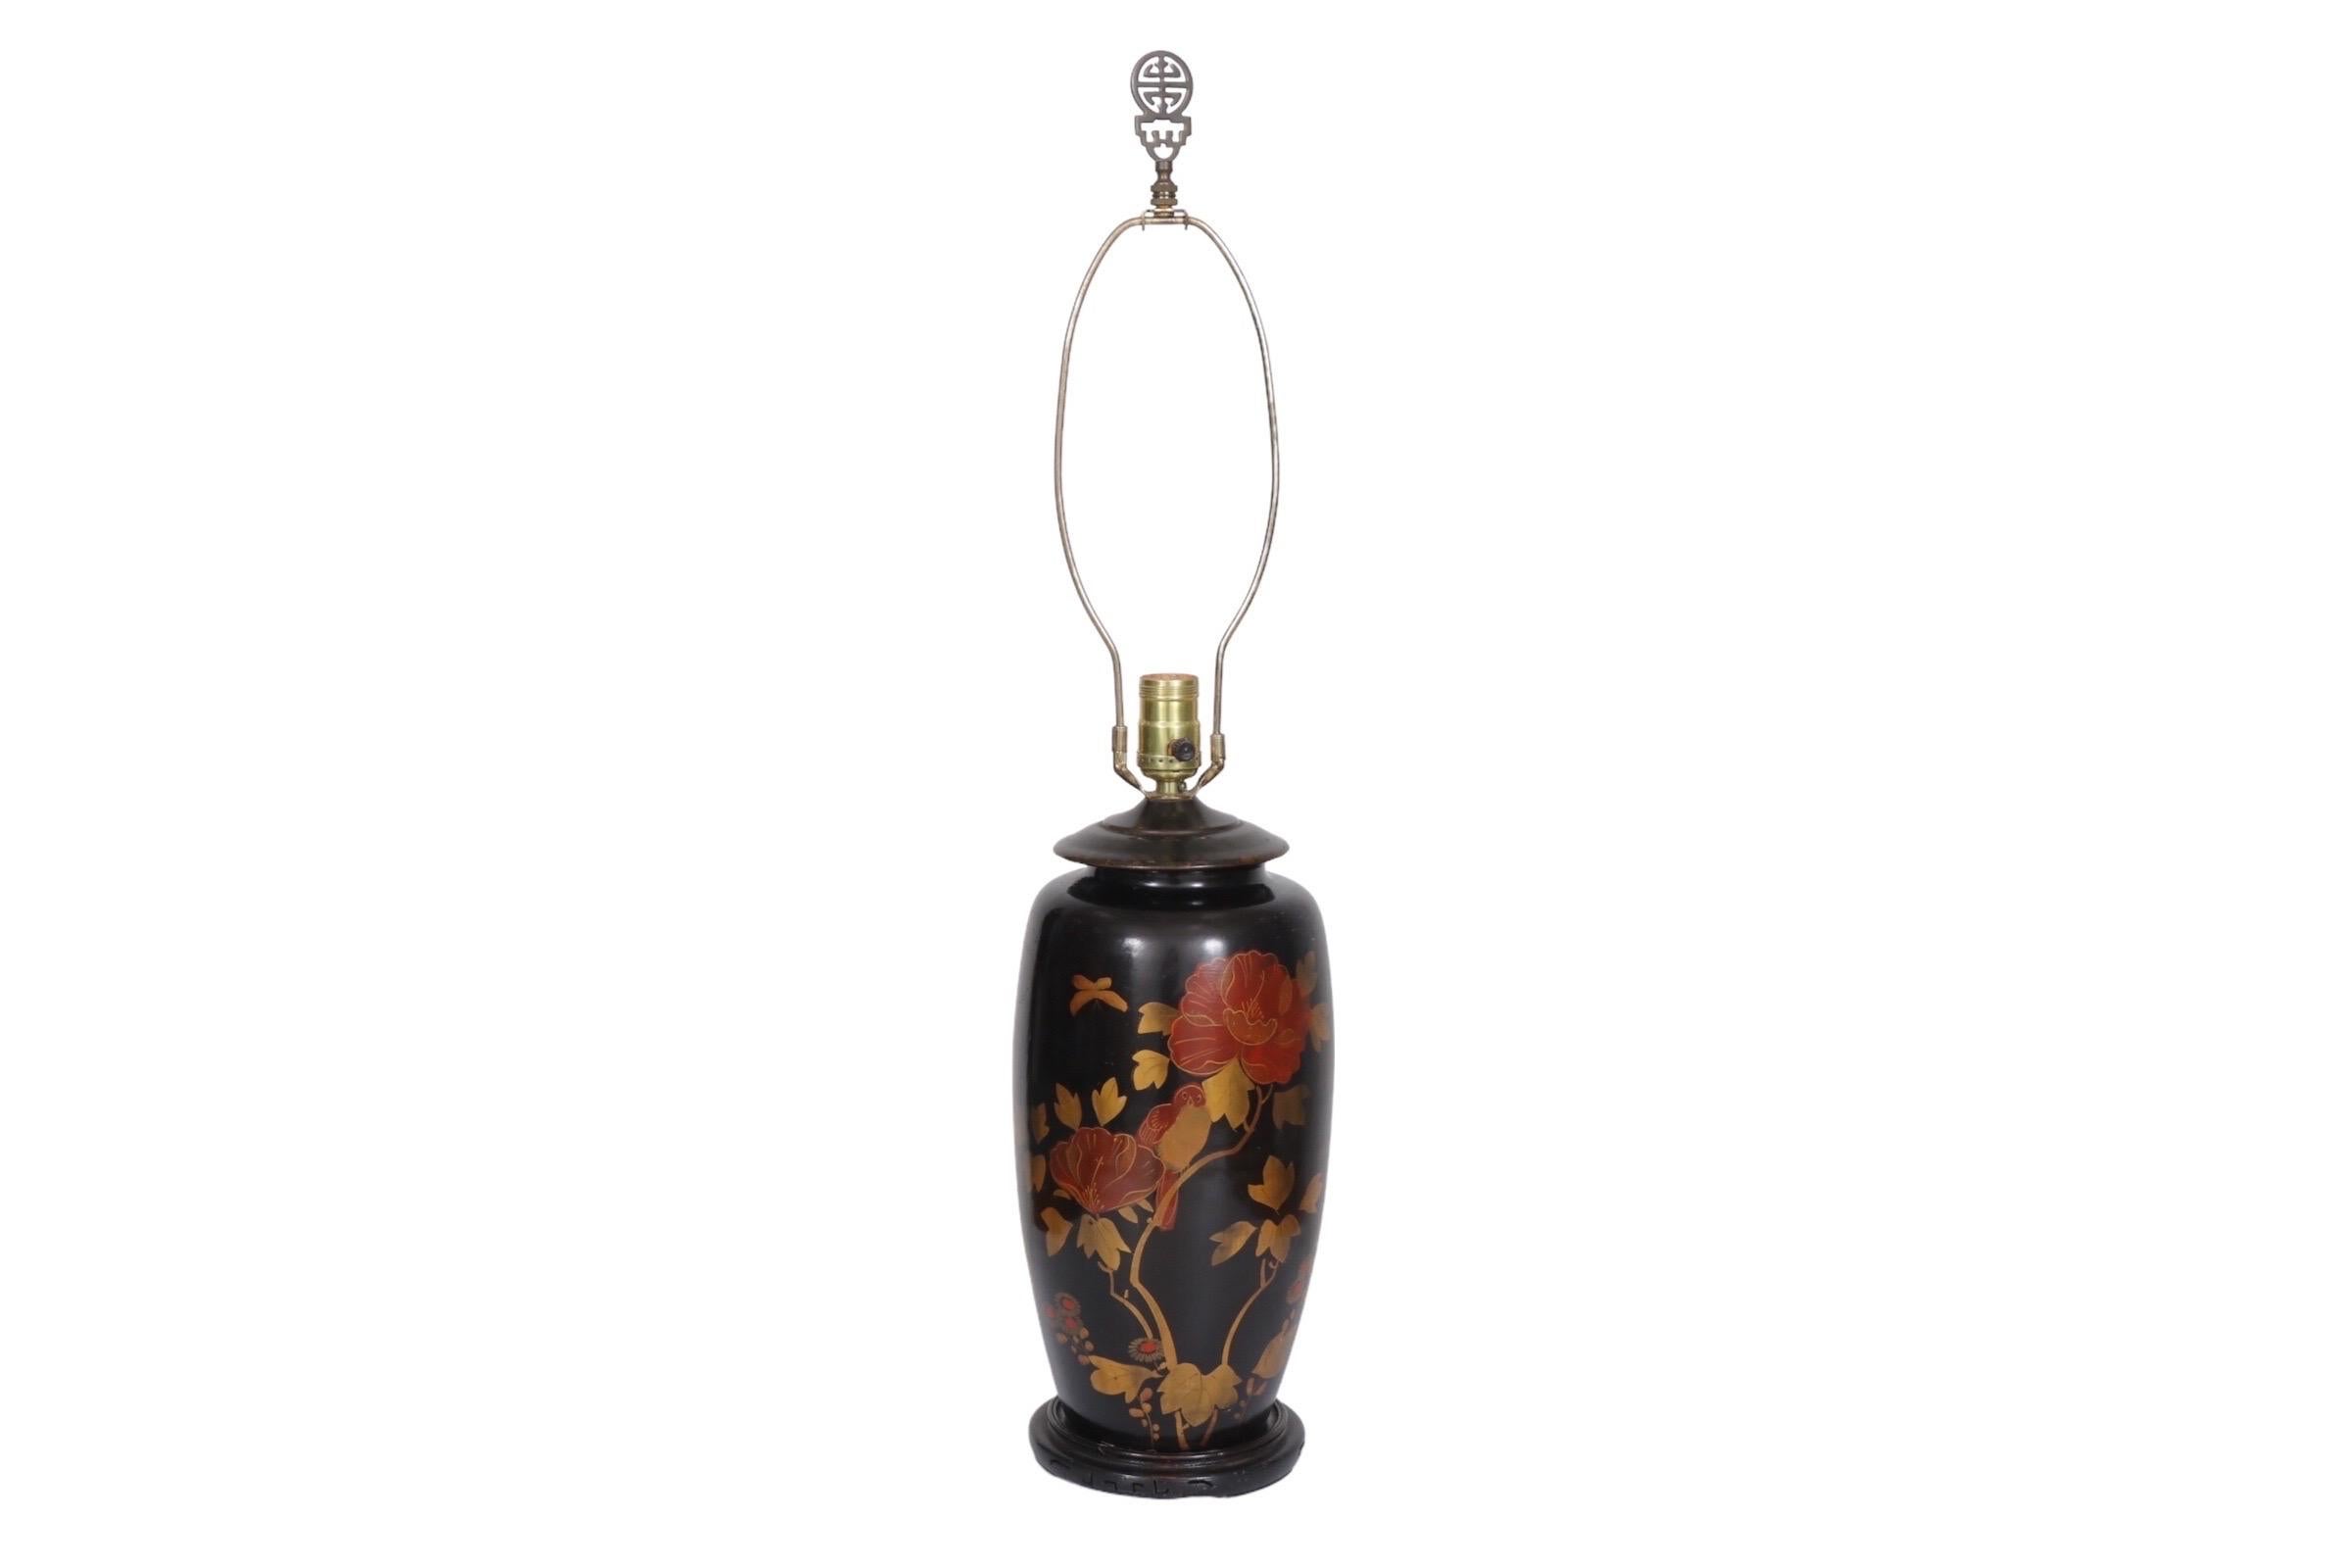 A black Japanned Chinoiserie table lamp. The urn shaped vase has a metal cap and is exquisitely decorated on the front with hand painted red camellia flowers, gold foliage and birds. Sits on a round stepped wooden base. The brass finial is the